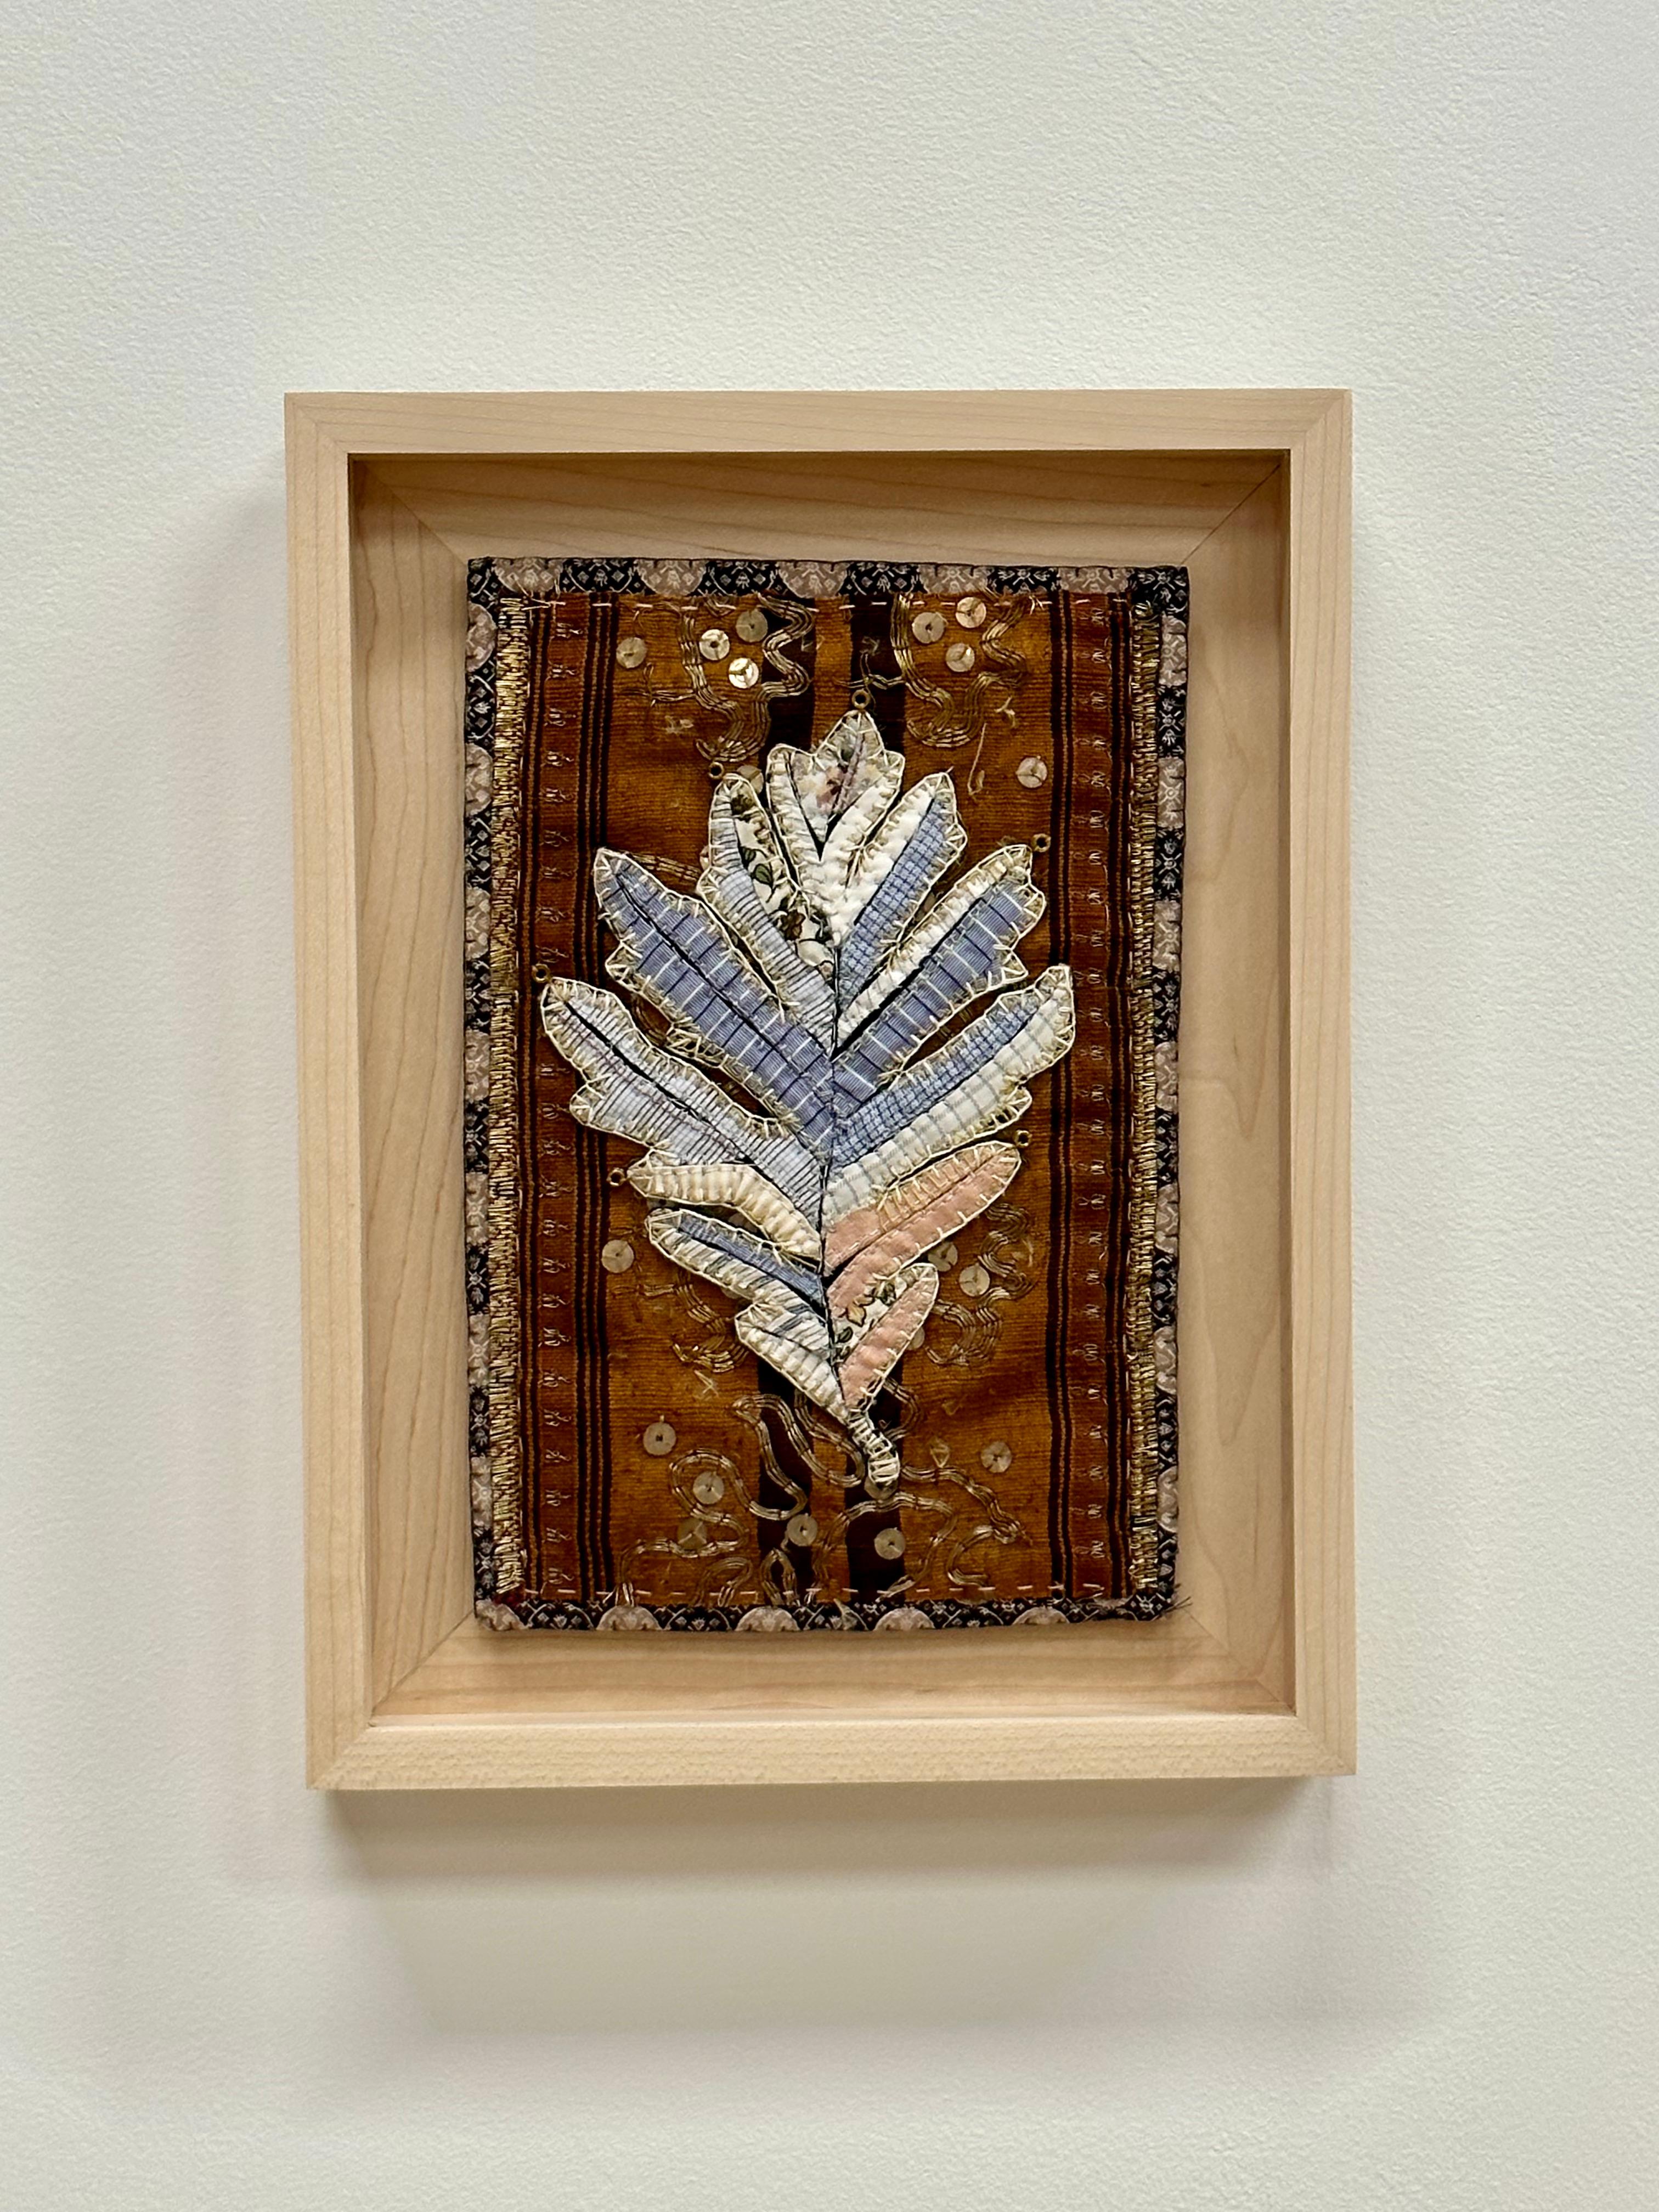 Tailored Herbaria Quercus Alba Blind Brook Watershed One, Botanical Textile - Contemporary Mixed Media Art by Donna Sharrett